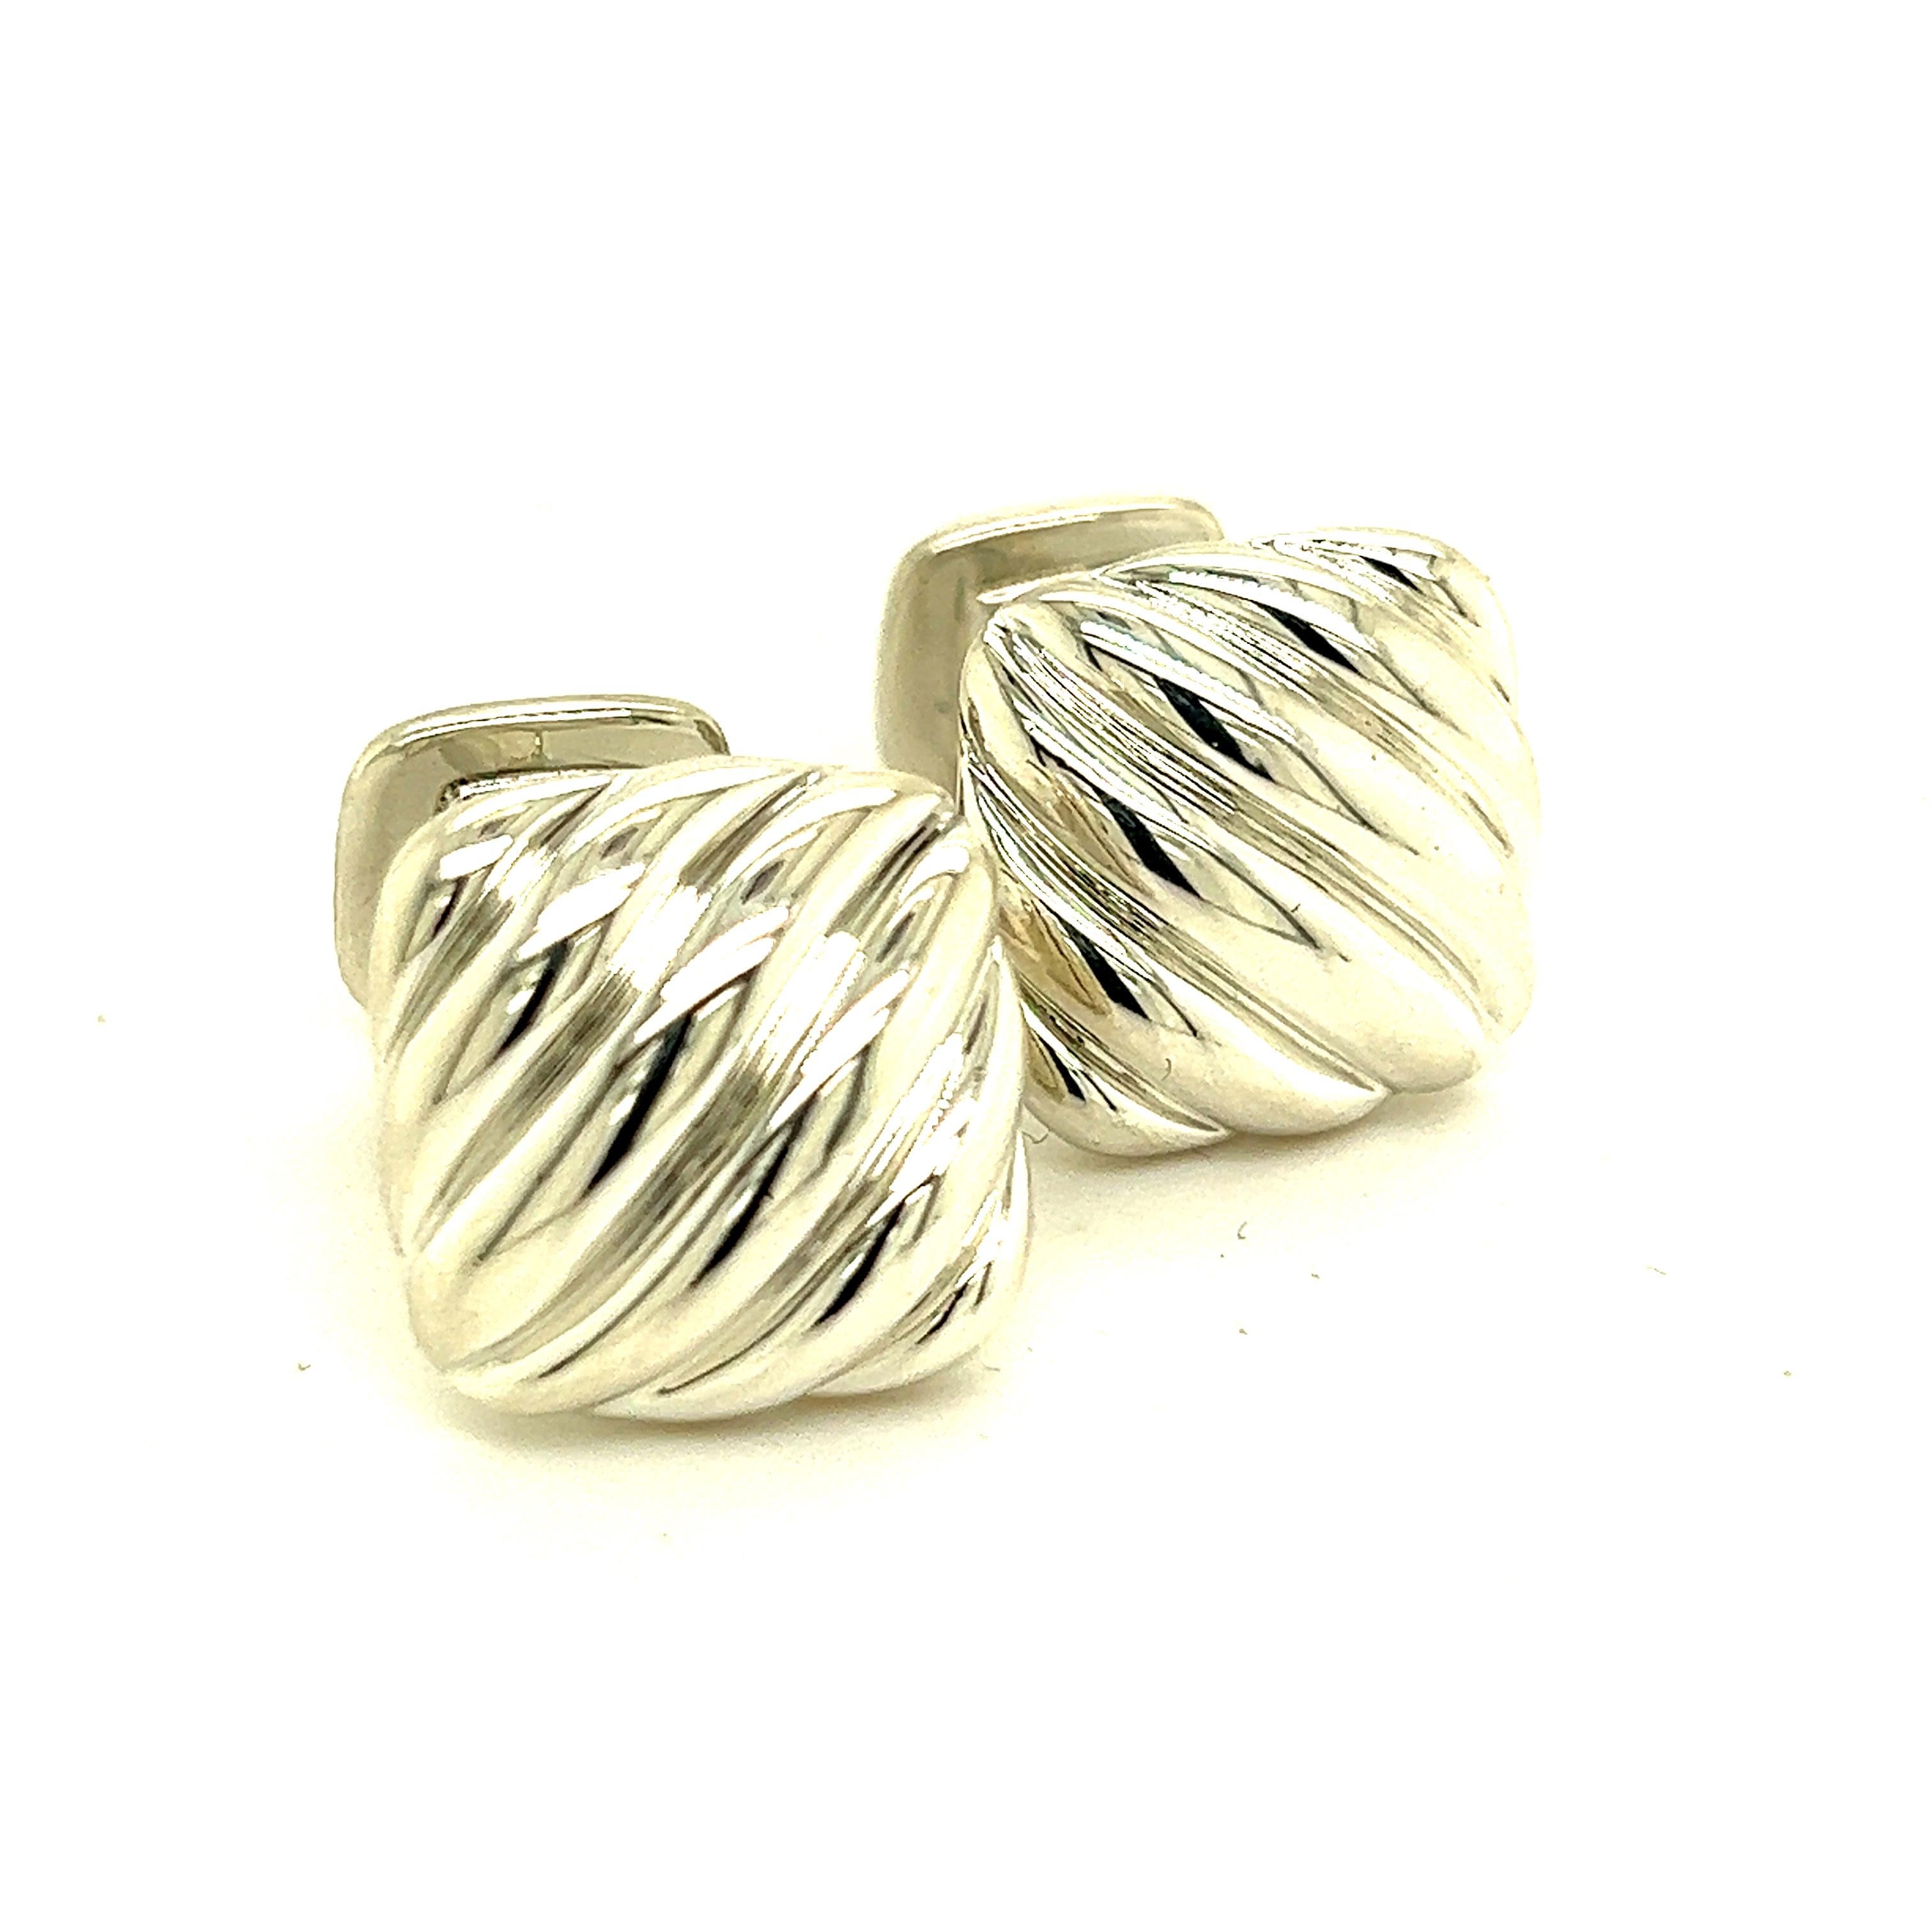 David Yurman Estate Mens Cufflinks Sterling Silver DY131

Retail: $799.00

TRUSTED SELLER SINCE 2002

PLEASE SEE OUR HUNDREDS OF POSITIVE FEEDBACKS FROM OUR CLIENTS!!

FREE SHIPPING

Details
Grams: 29
Metal: Sterling Silver

These Authentic David